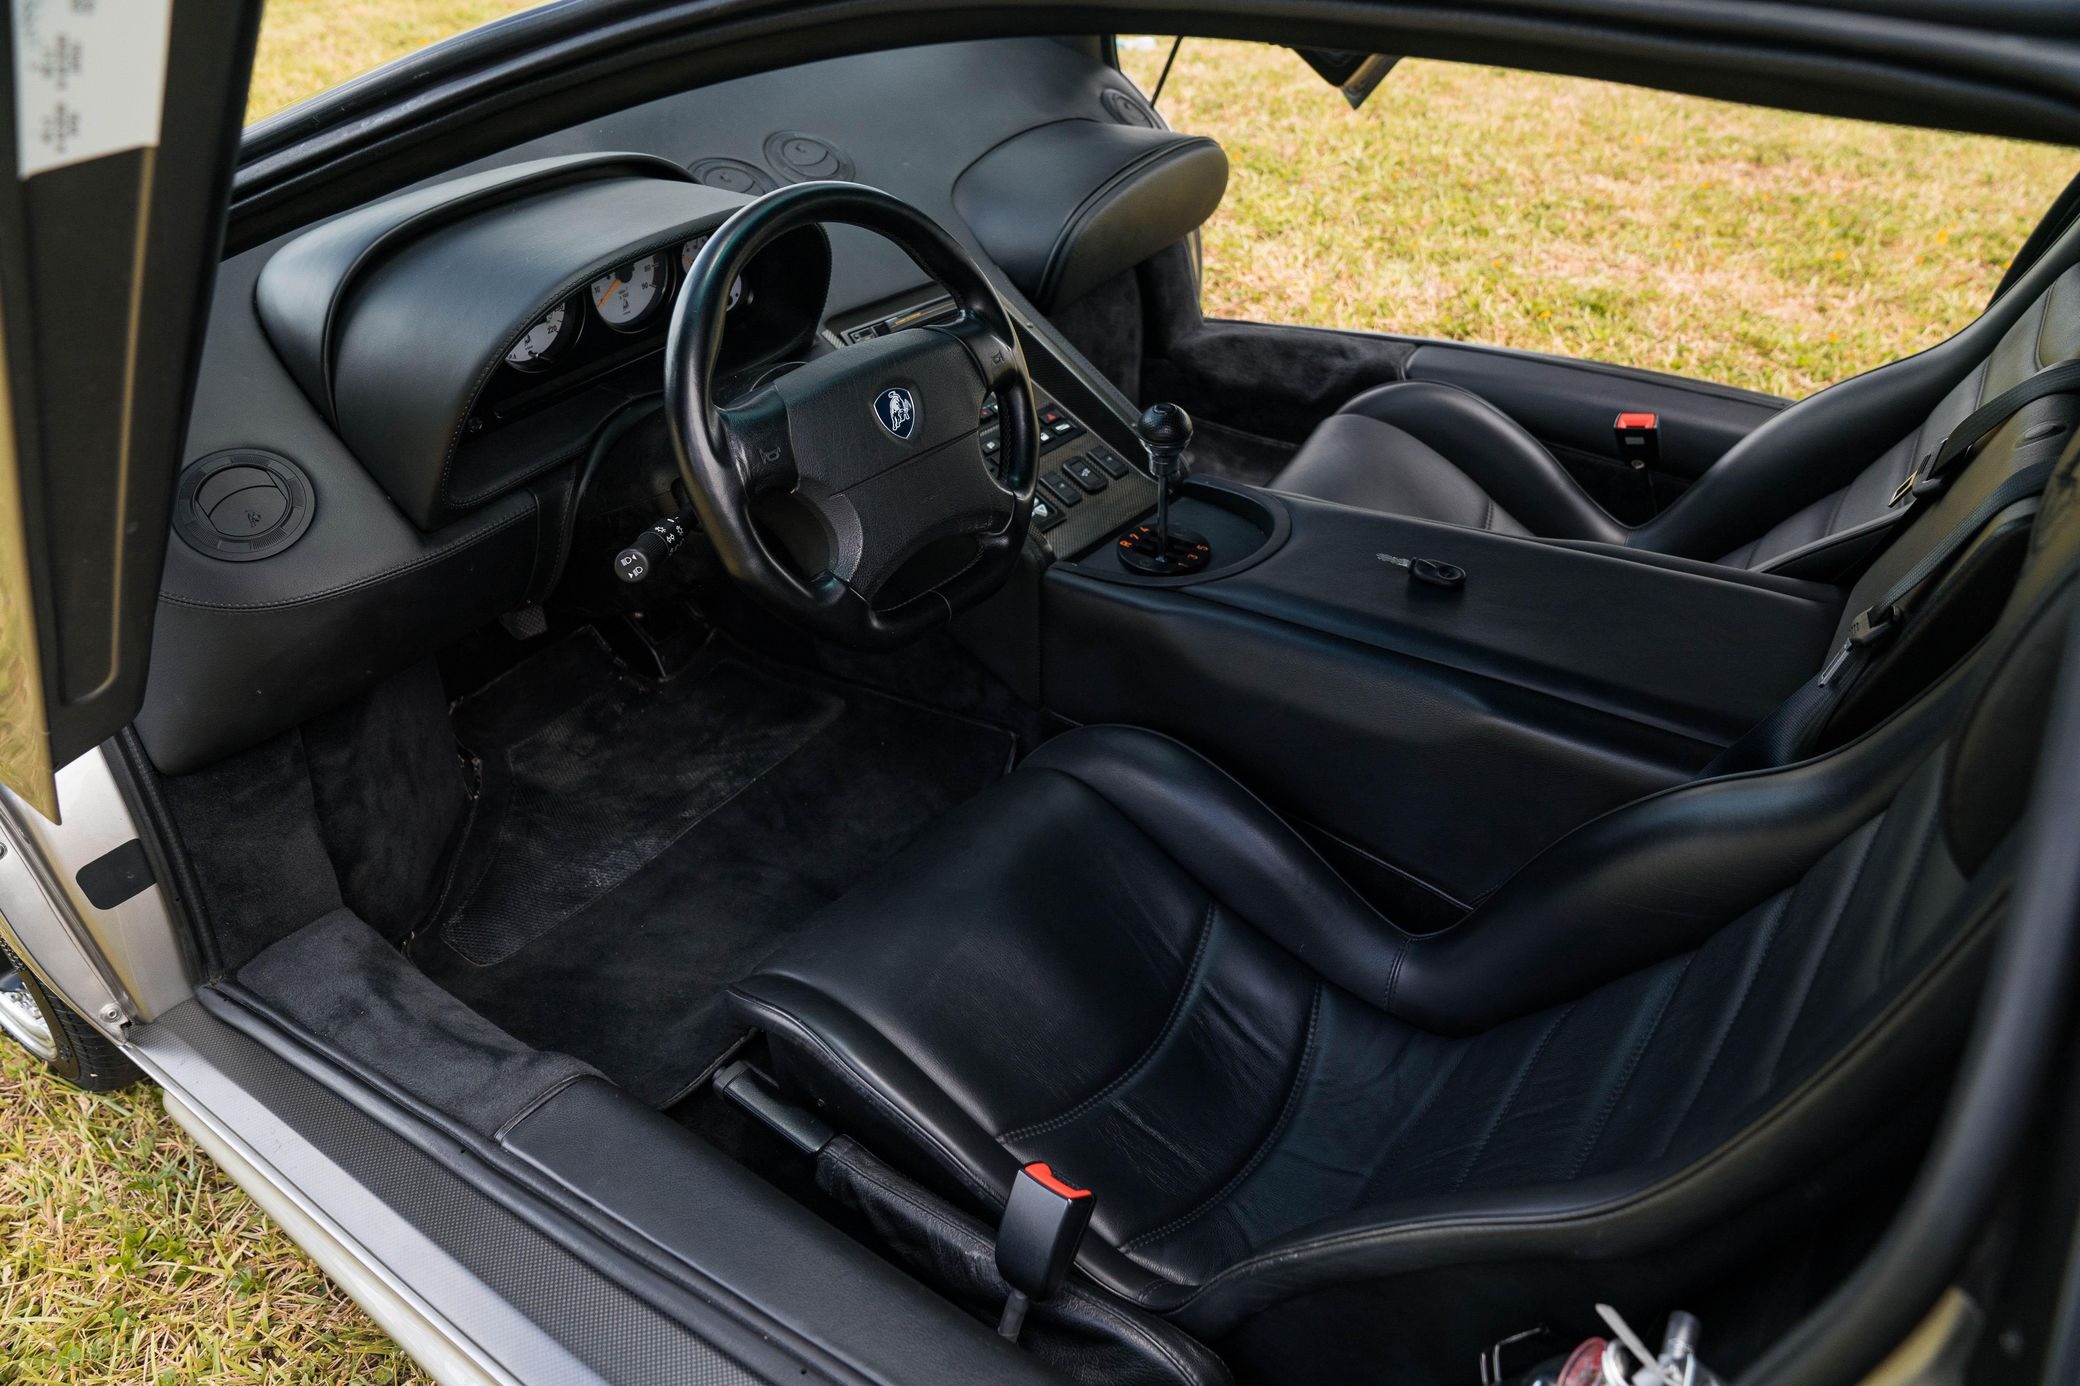 The black-leather seats and dashboard of a silver 1998 Lamborghini Diablo SV parked on a lawn with its doors open